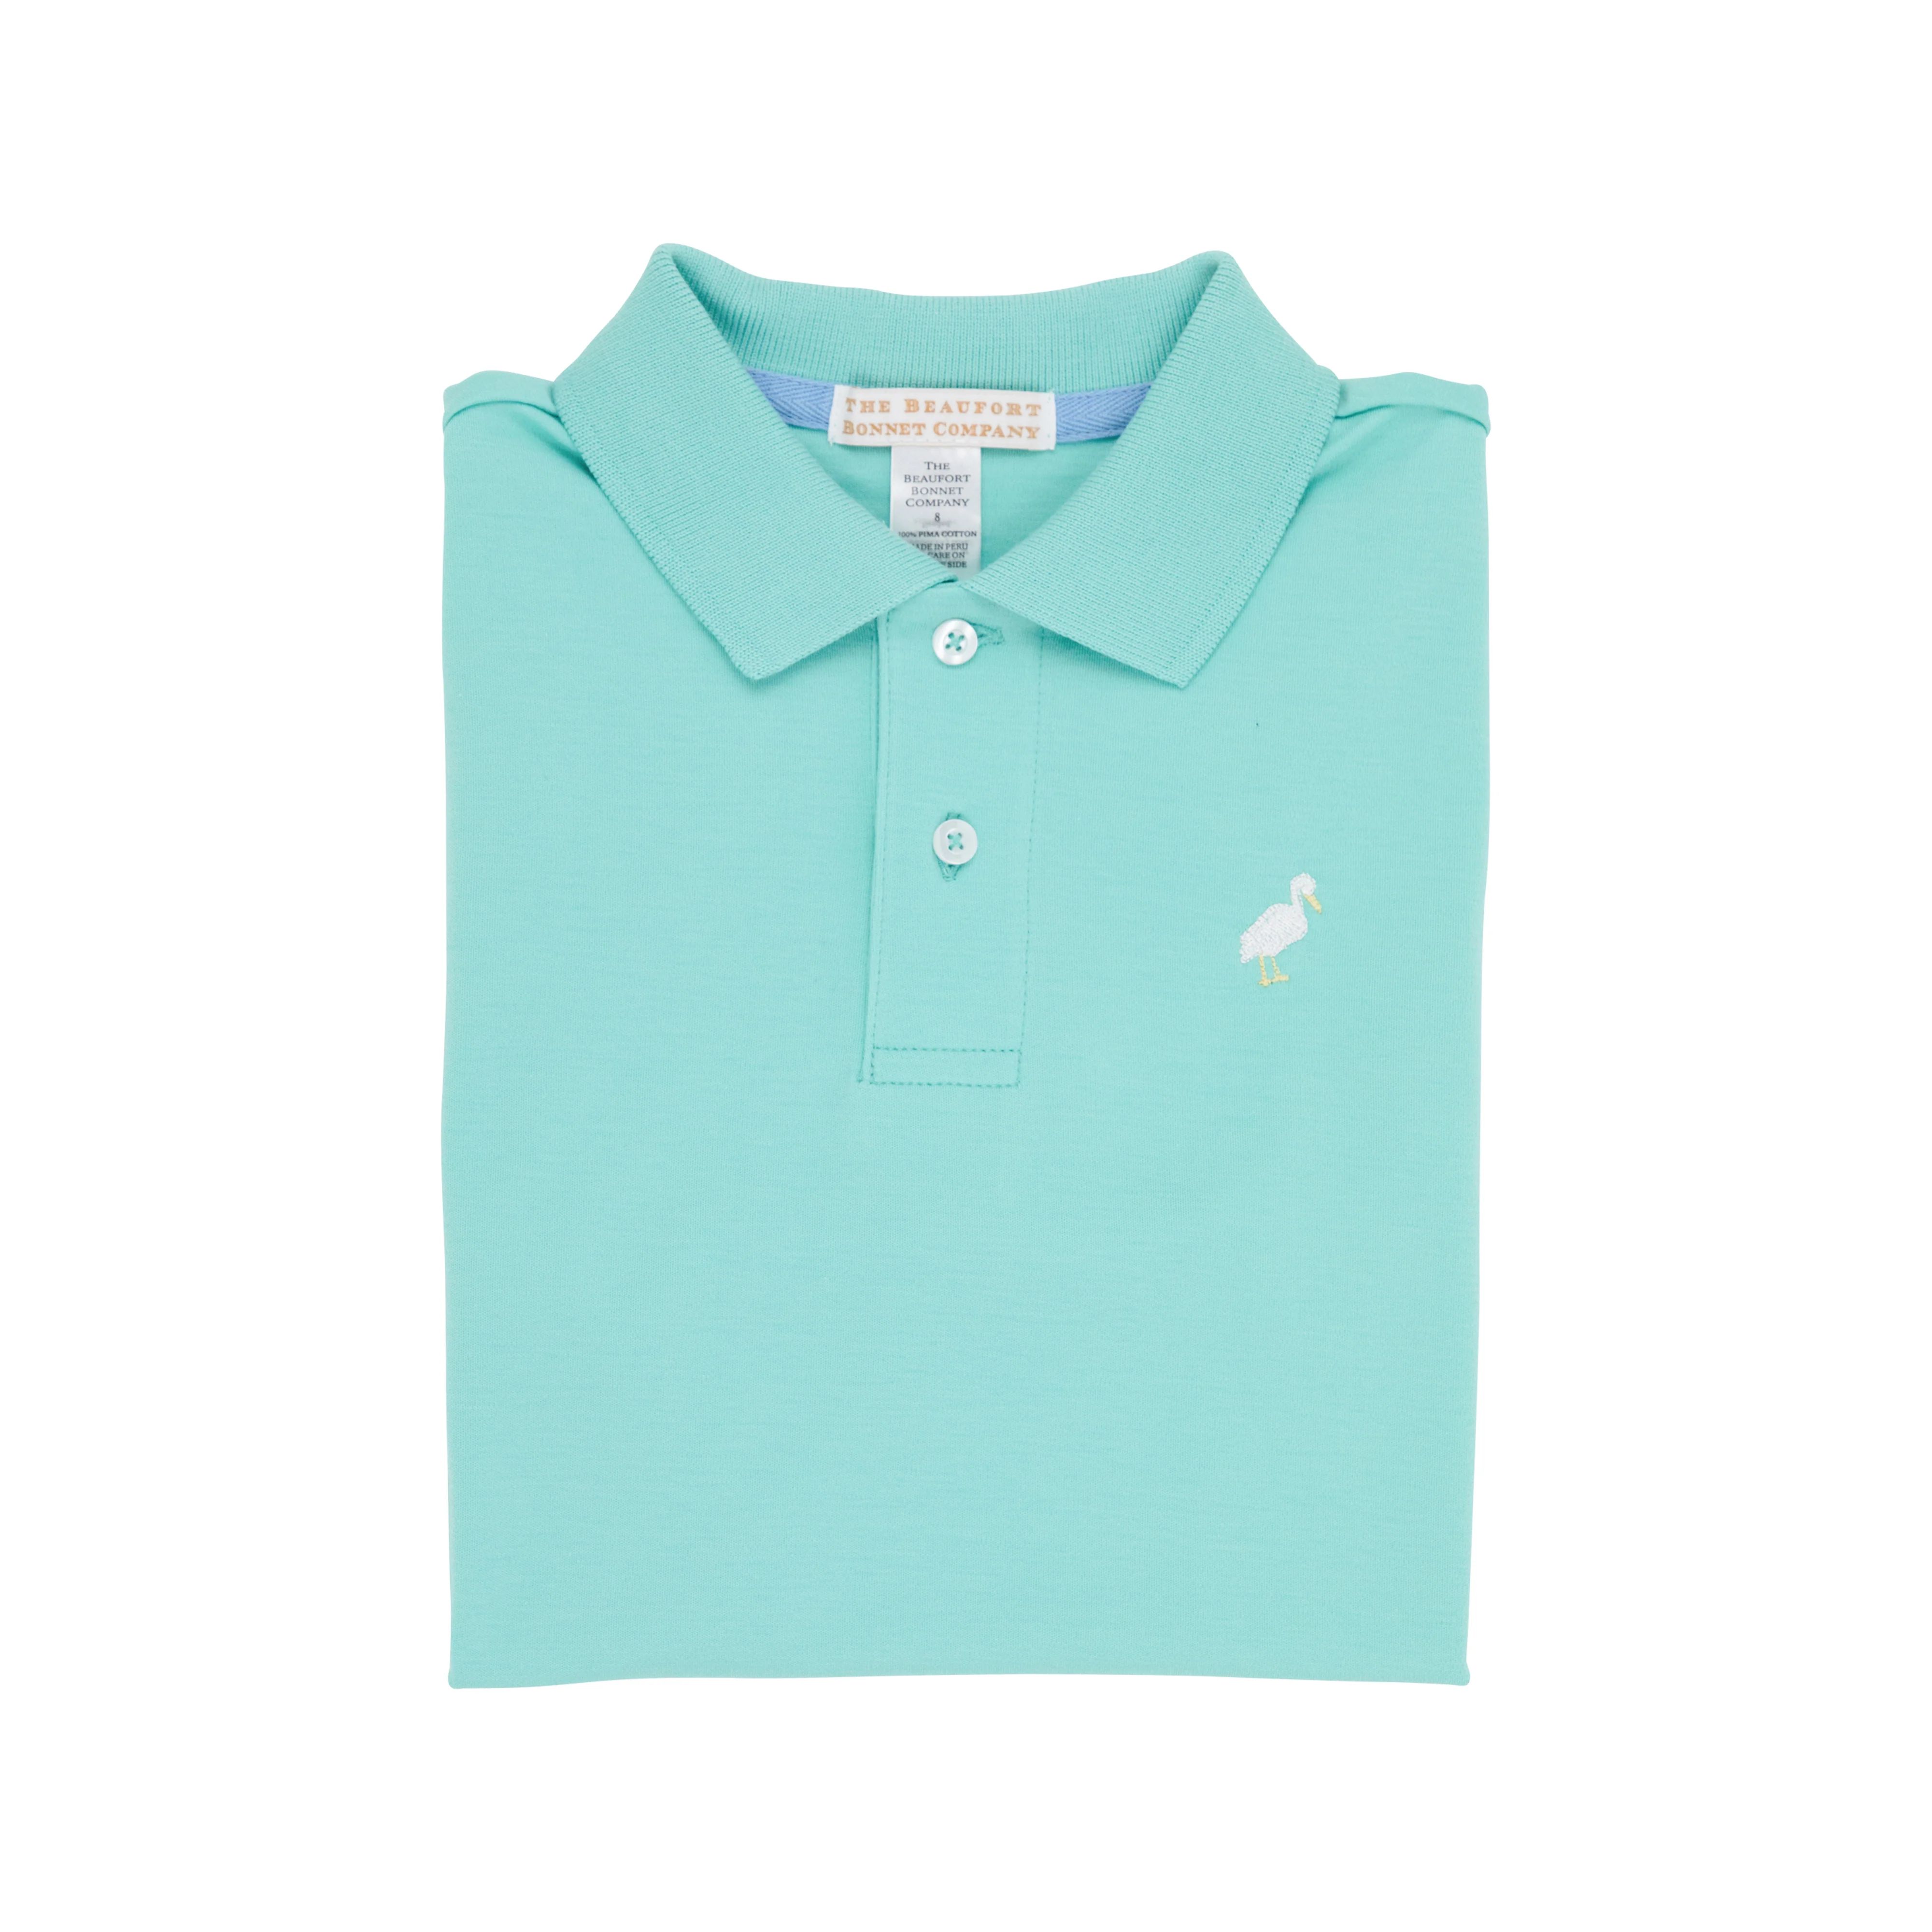 Prim & Proper Polo & Onesie - Turks Teal with Multicolor Stork | The Beaufort Bonnet Company